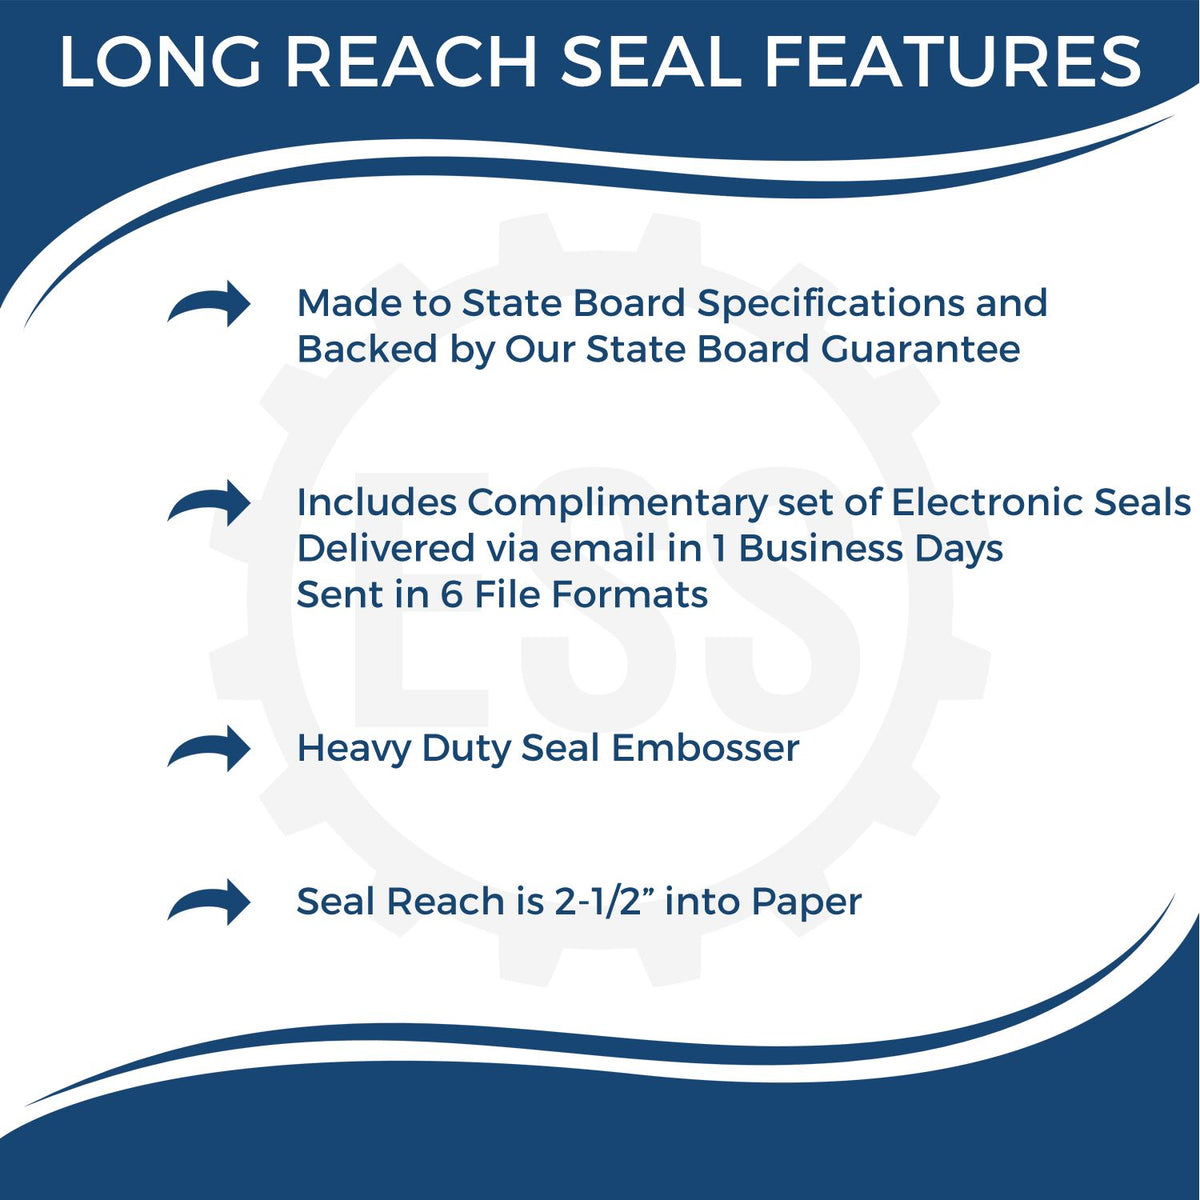 A picture of an infographic highlighting the selling points for the Long Reach Hawaii Geology Seal